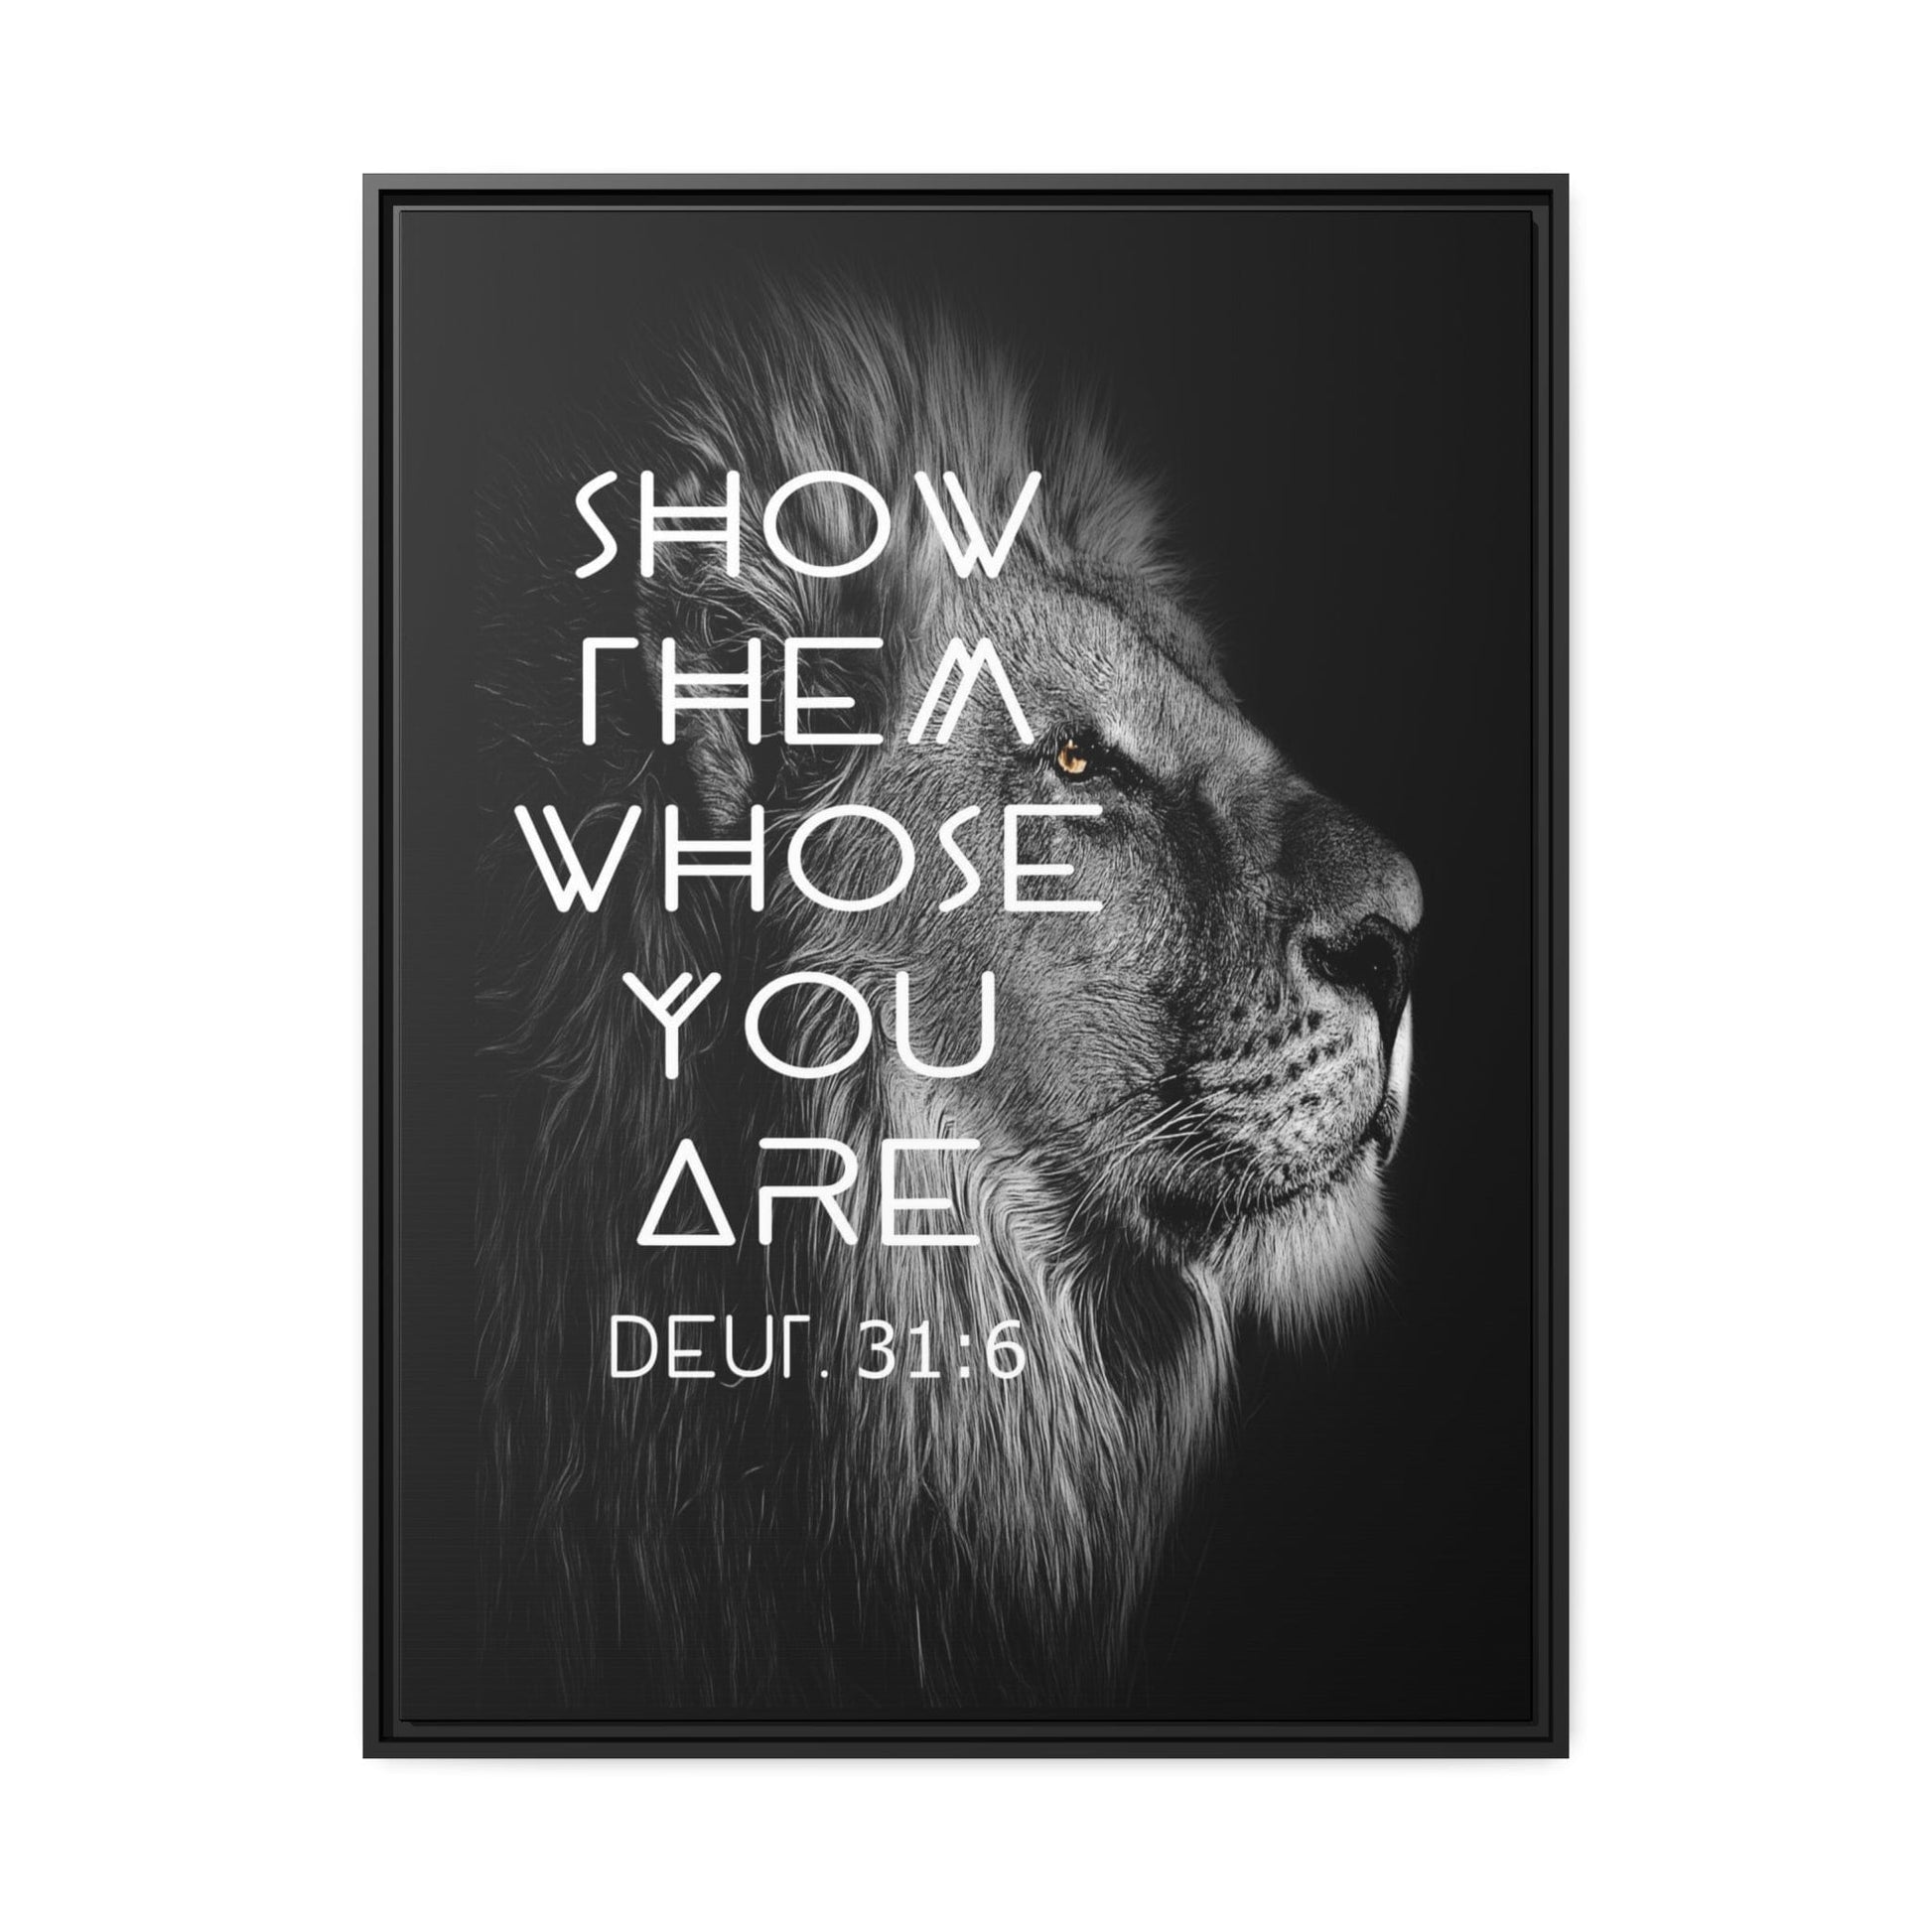 Printify Canvas 30" x 40" (Vertical) / Black / 1.25" Show Them Whose You Are - Deuteronomy 31:6 Christian Canvas Wall Art